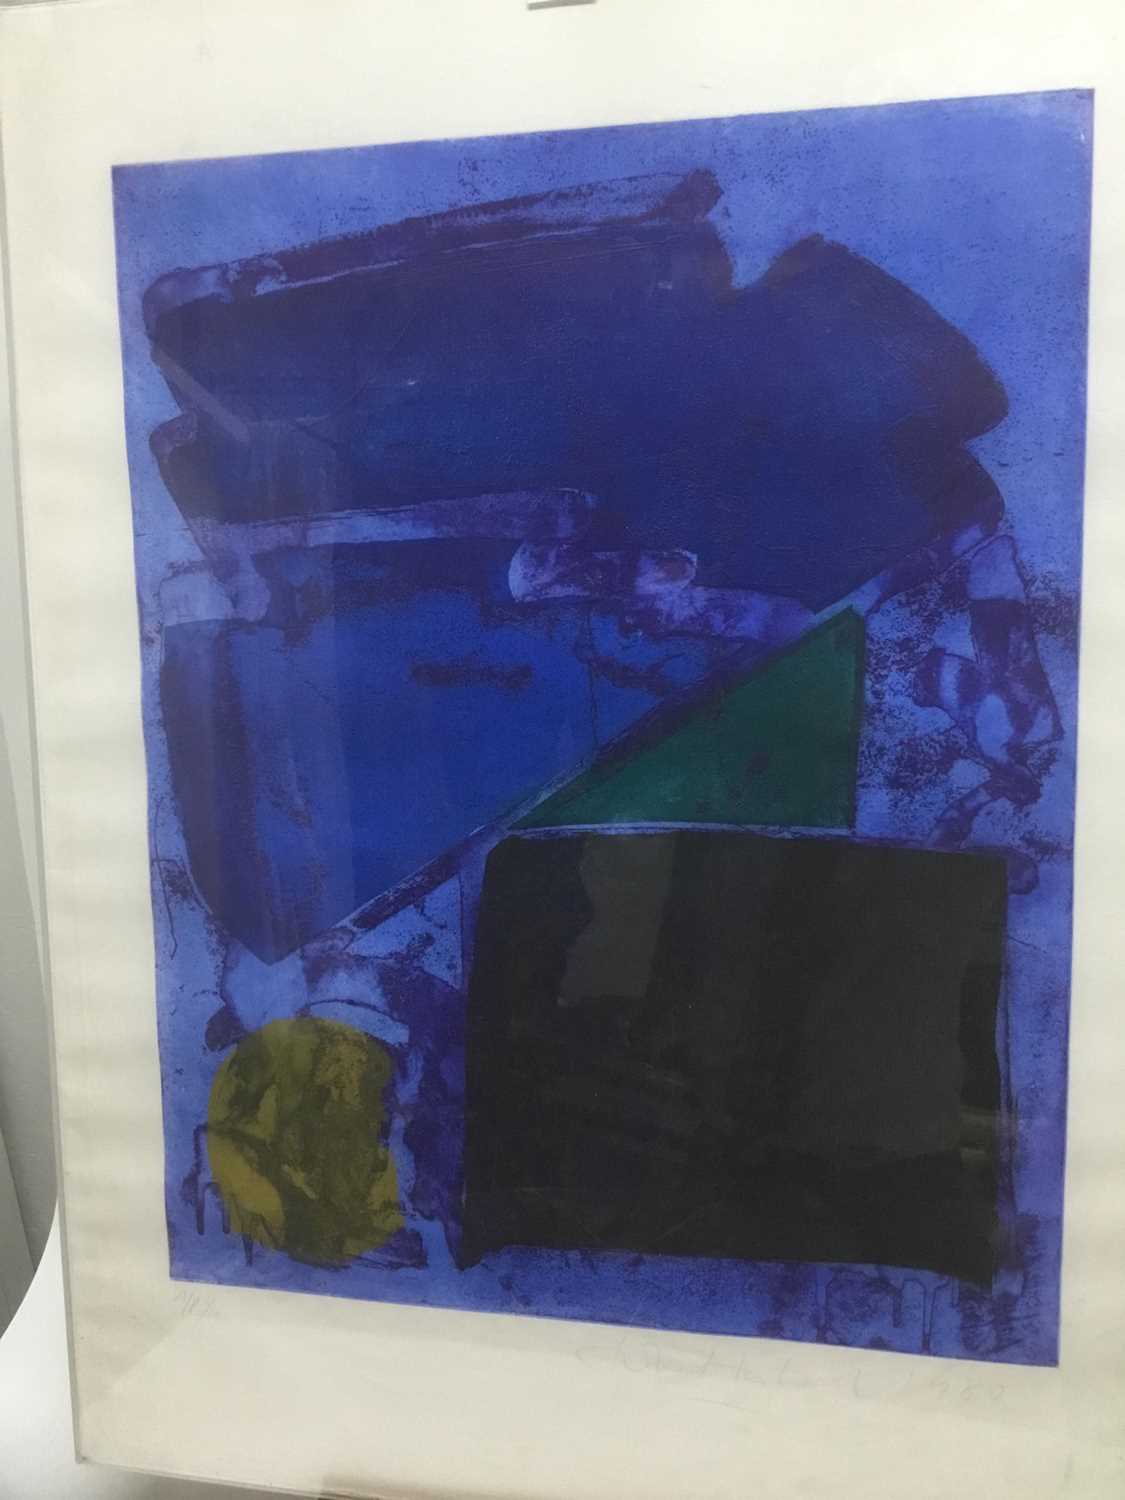 Lot 3 - John Hoyland (1934-2011) etching and aquatint 'Memphis Blue' artist's proof, numbered 1 of 10, signed, 68 x 54.5cm, glazed frame